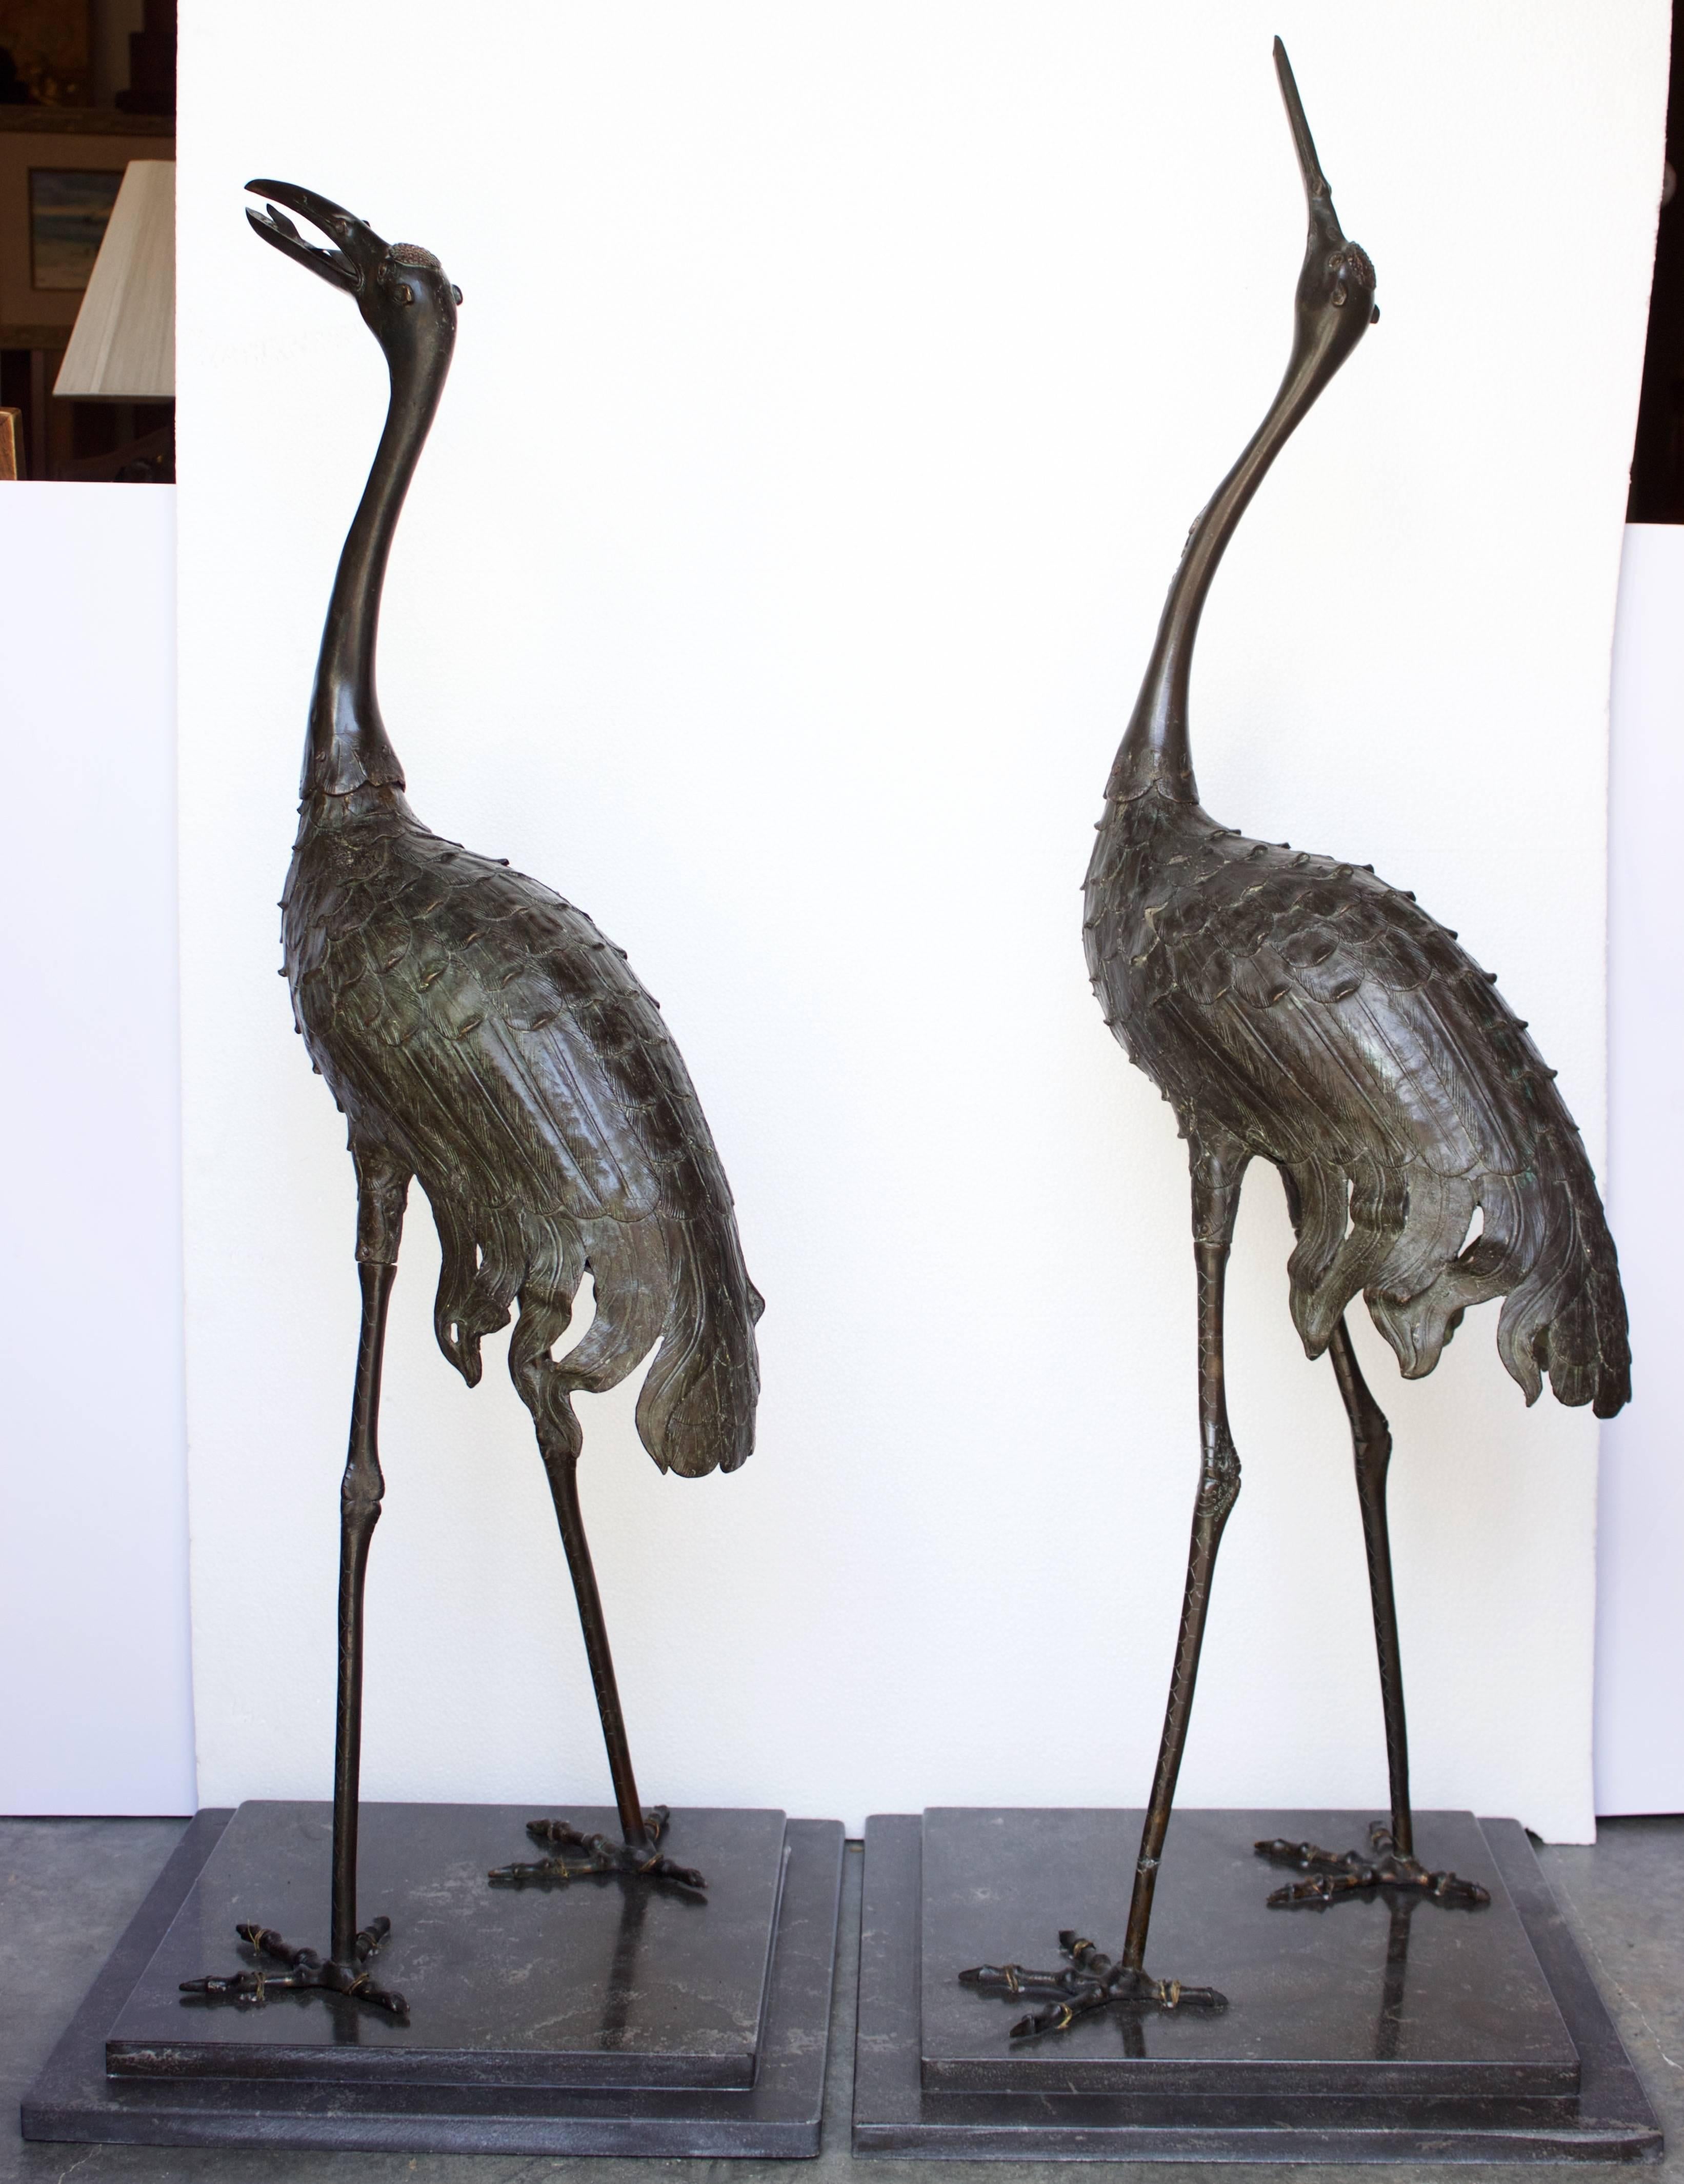 Elegant pair of bronze cranes of the Meiji Pd with finely detailed beak, feathers, legs and feet. Raised on black granite base (recent). Probably sculpted as garden ornament in a bronze body with green color and red spot on top of the head.
Red